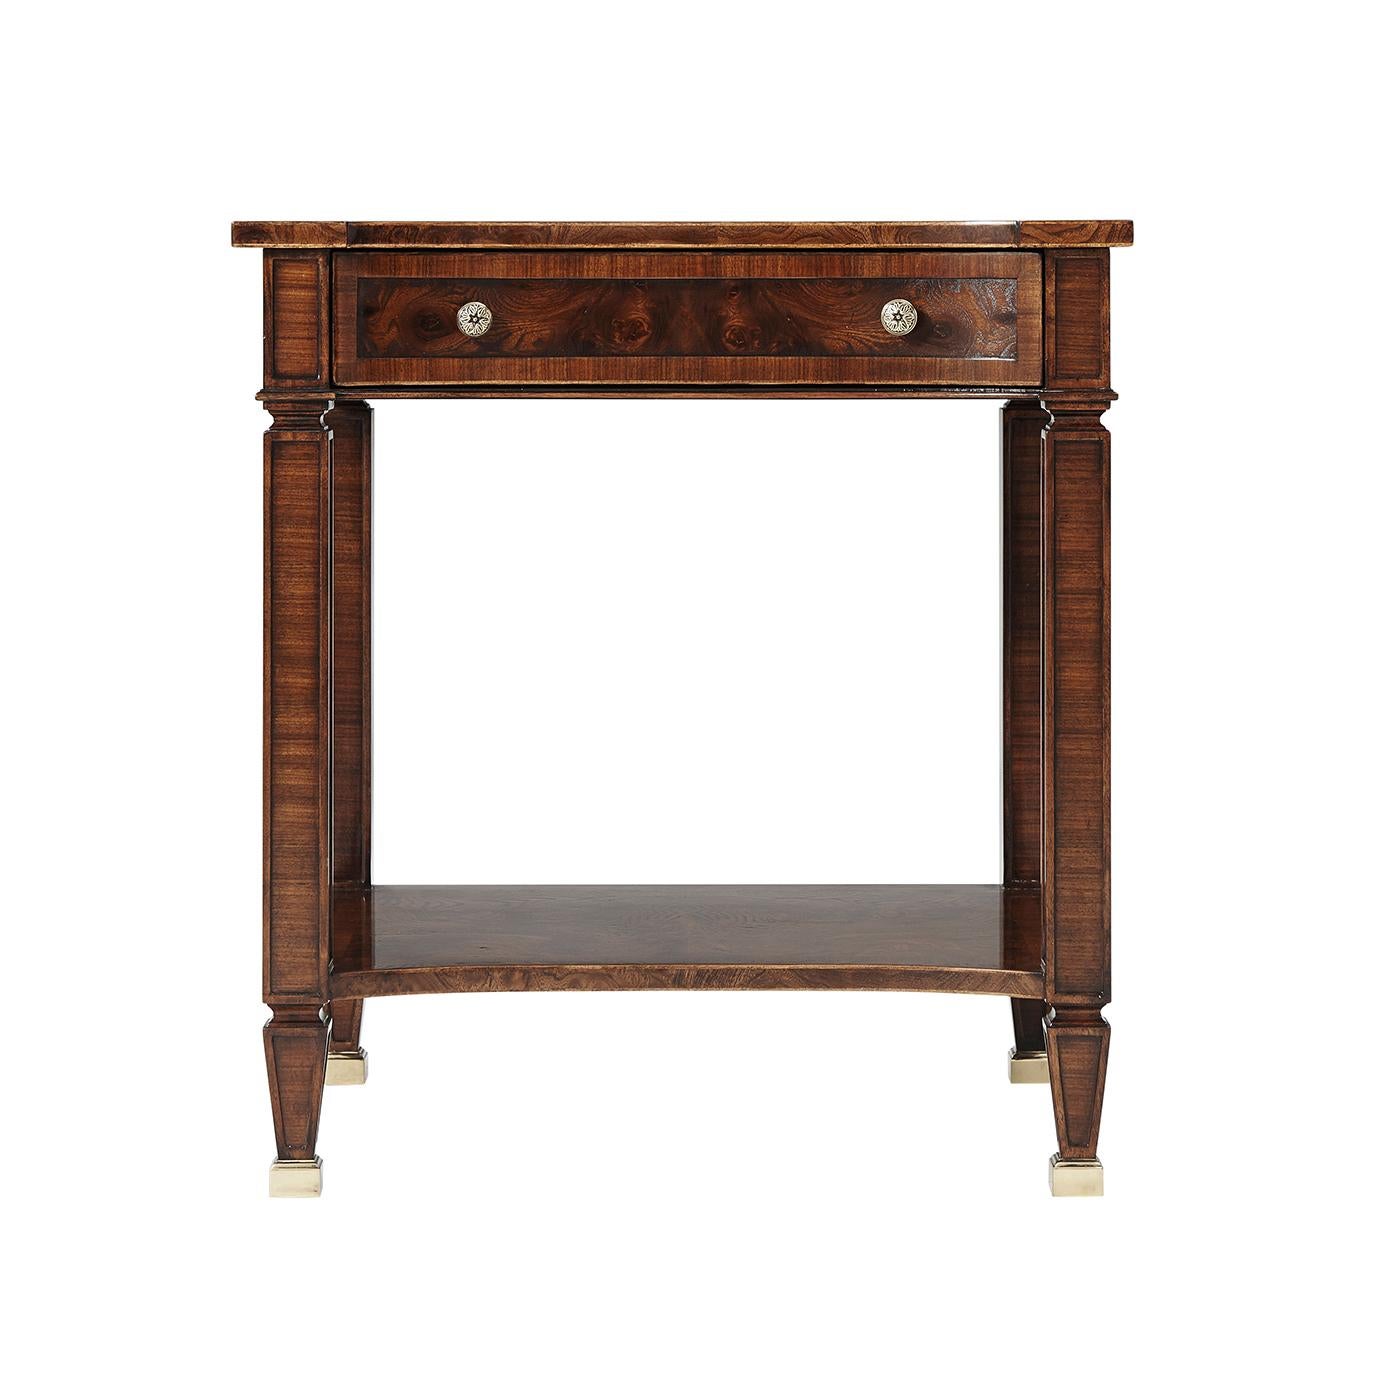 A Regency style mahogany end table with figured elm and rosewood crossbanded, the rectangular top with protruding angular corners and a concave front above a paneled frieze with one drawer, above paneled rosewood legs joined by an under tier, on